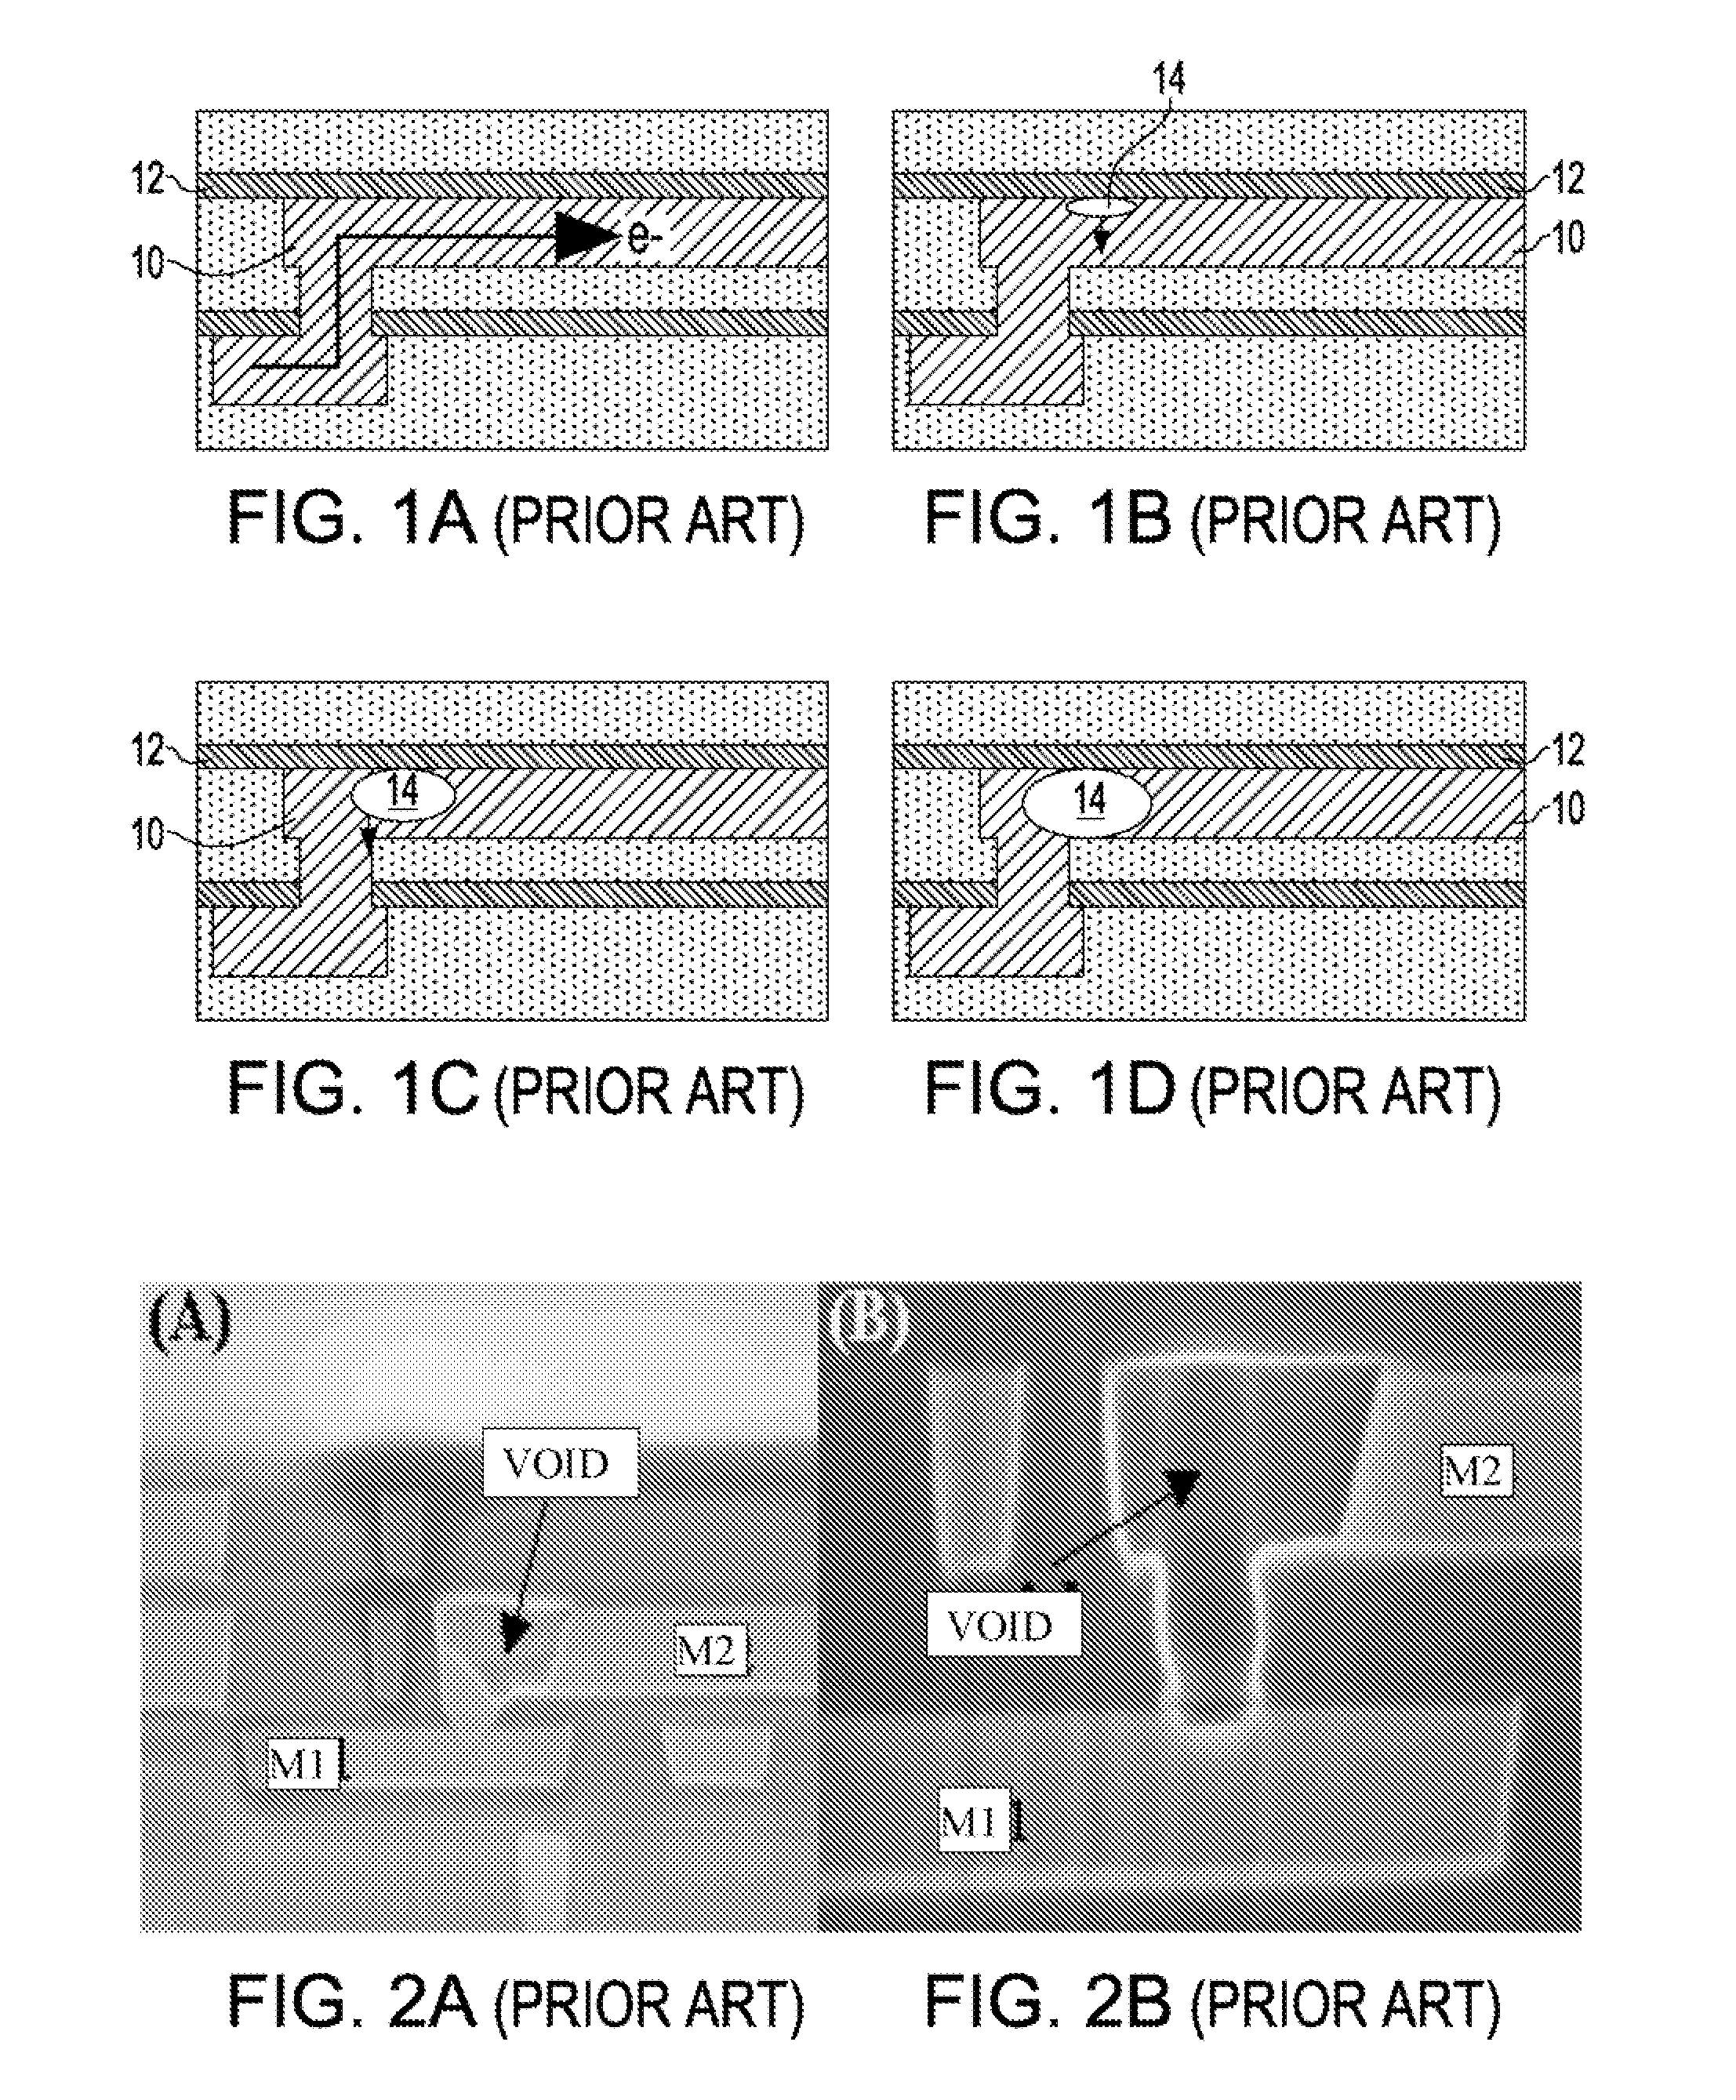 Interconnect structure having enhanced electromigration reliabilty and a method of fabricating same